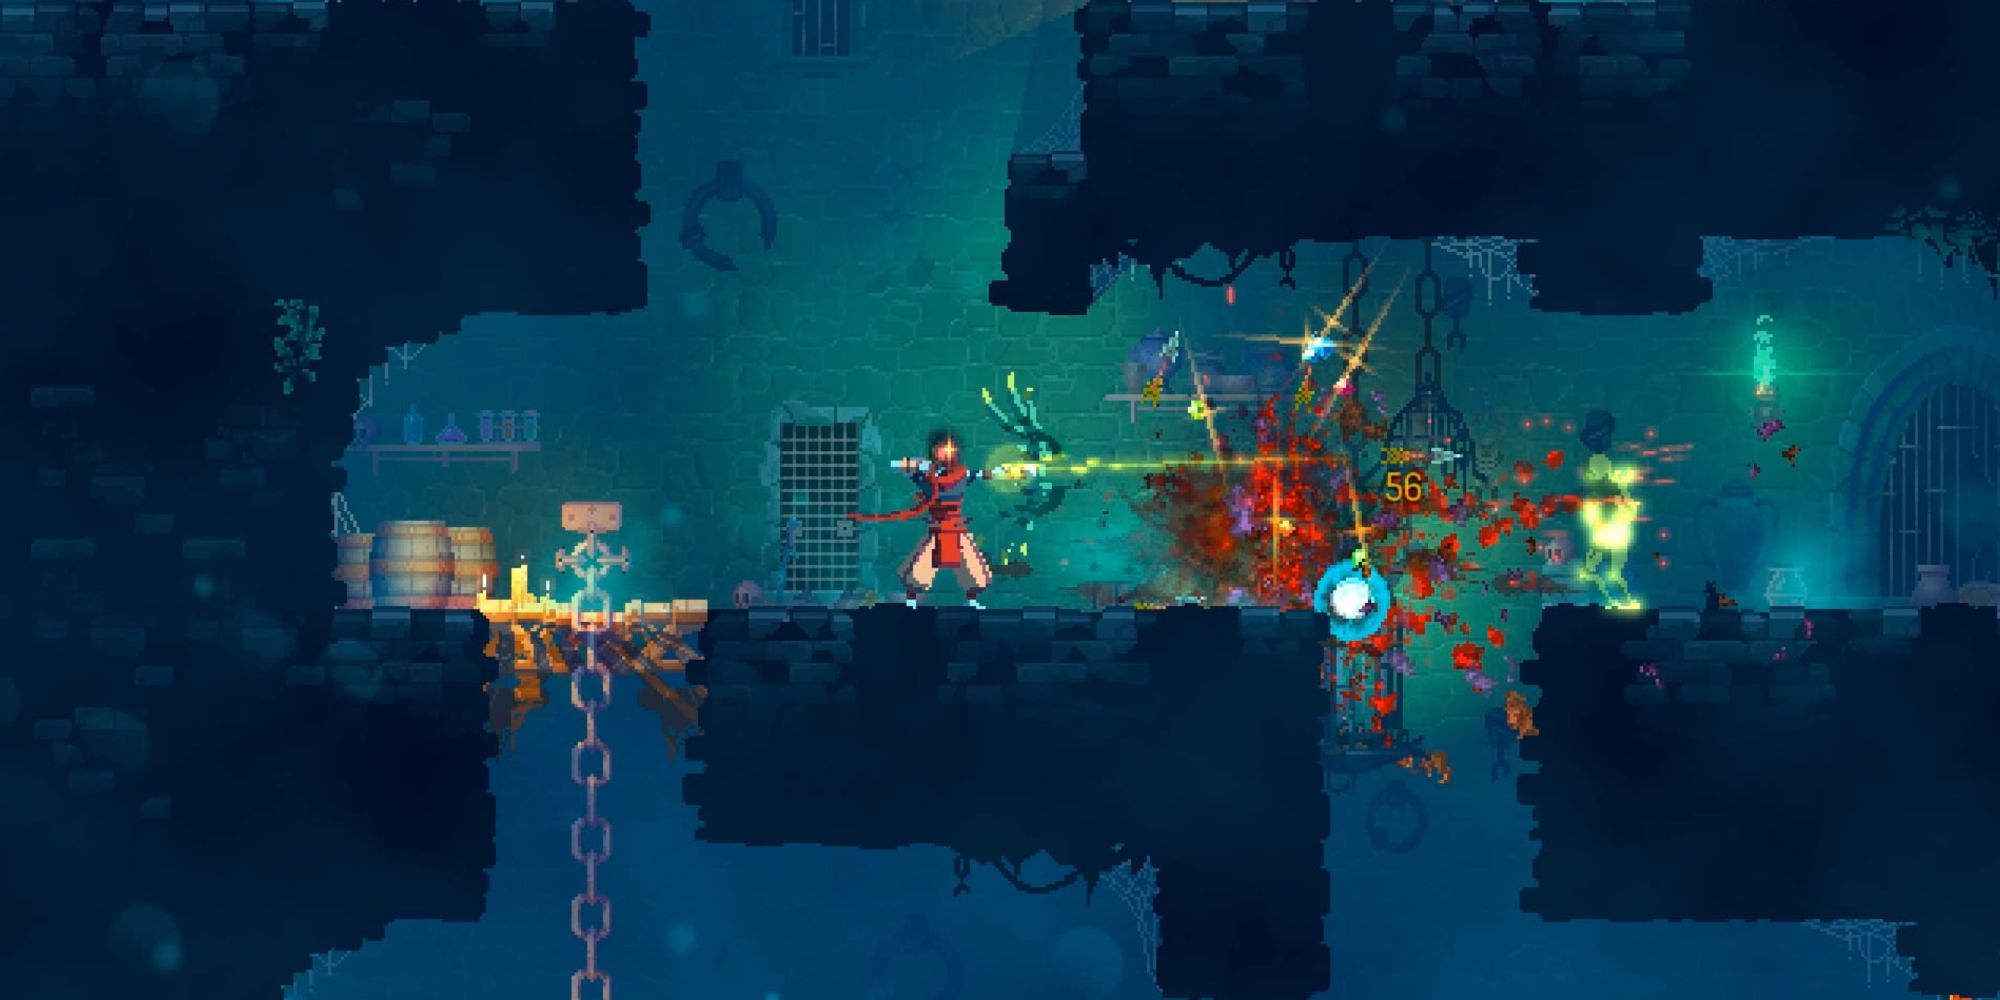 Protagonist shooting an arrow at mobs in Dead Cells